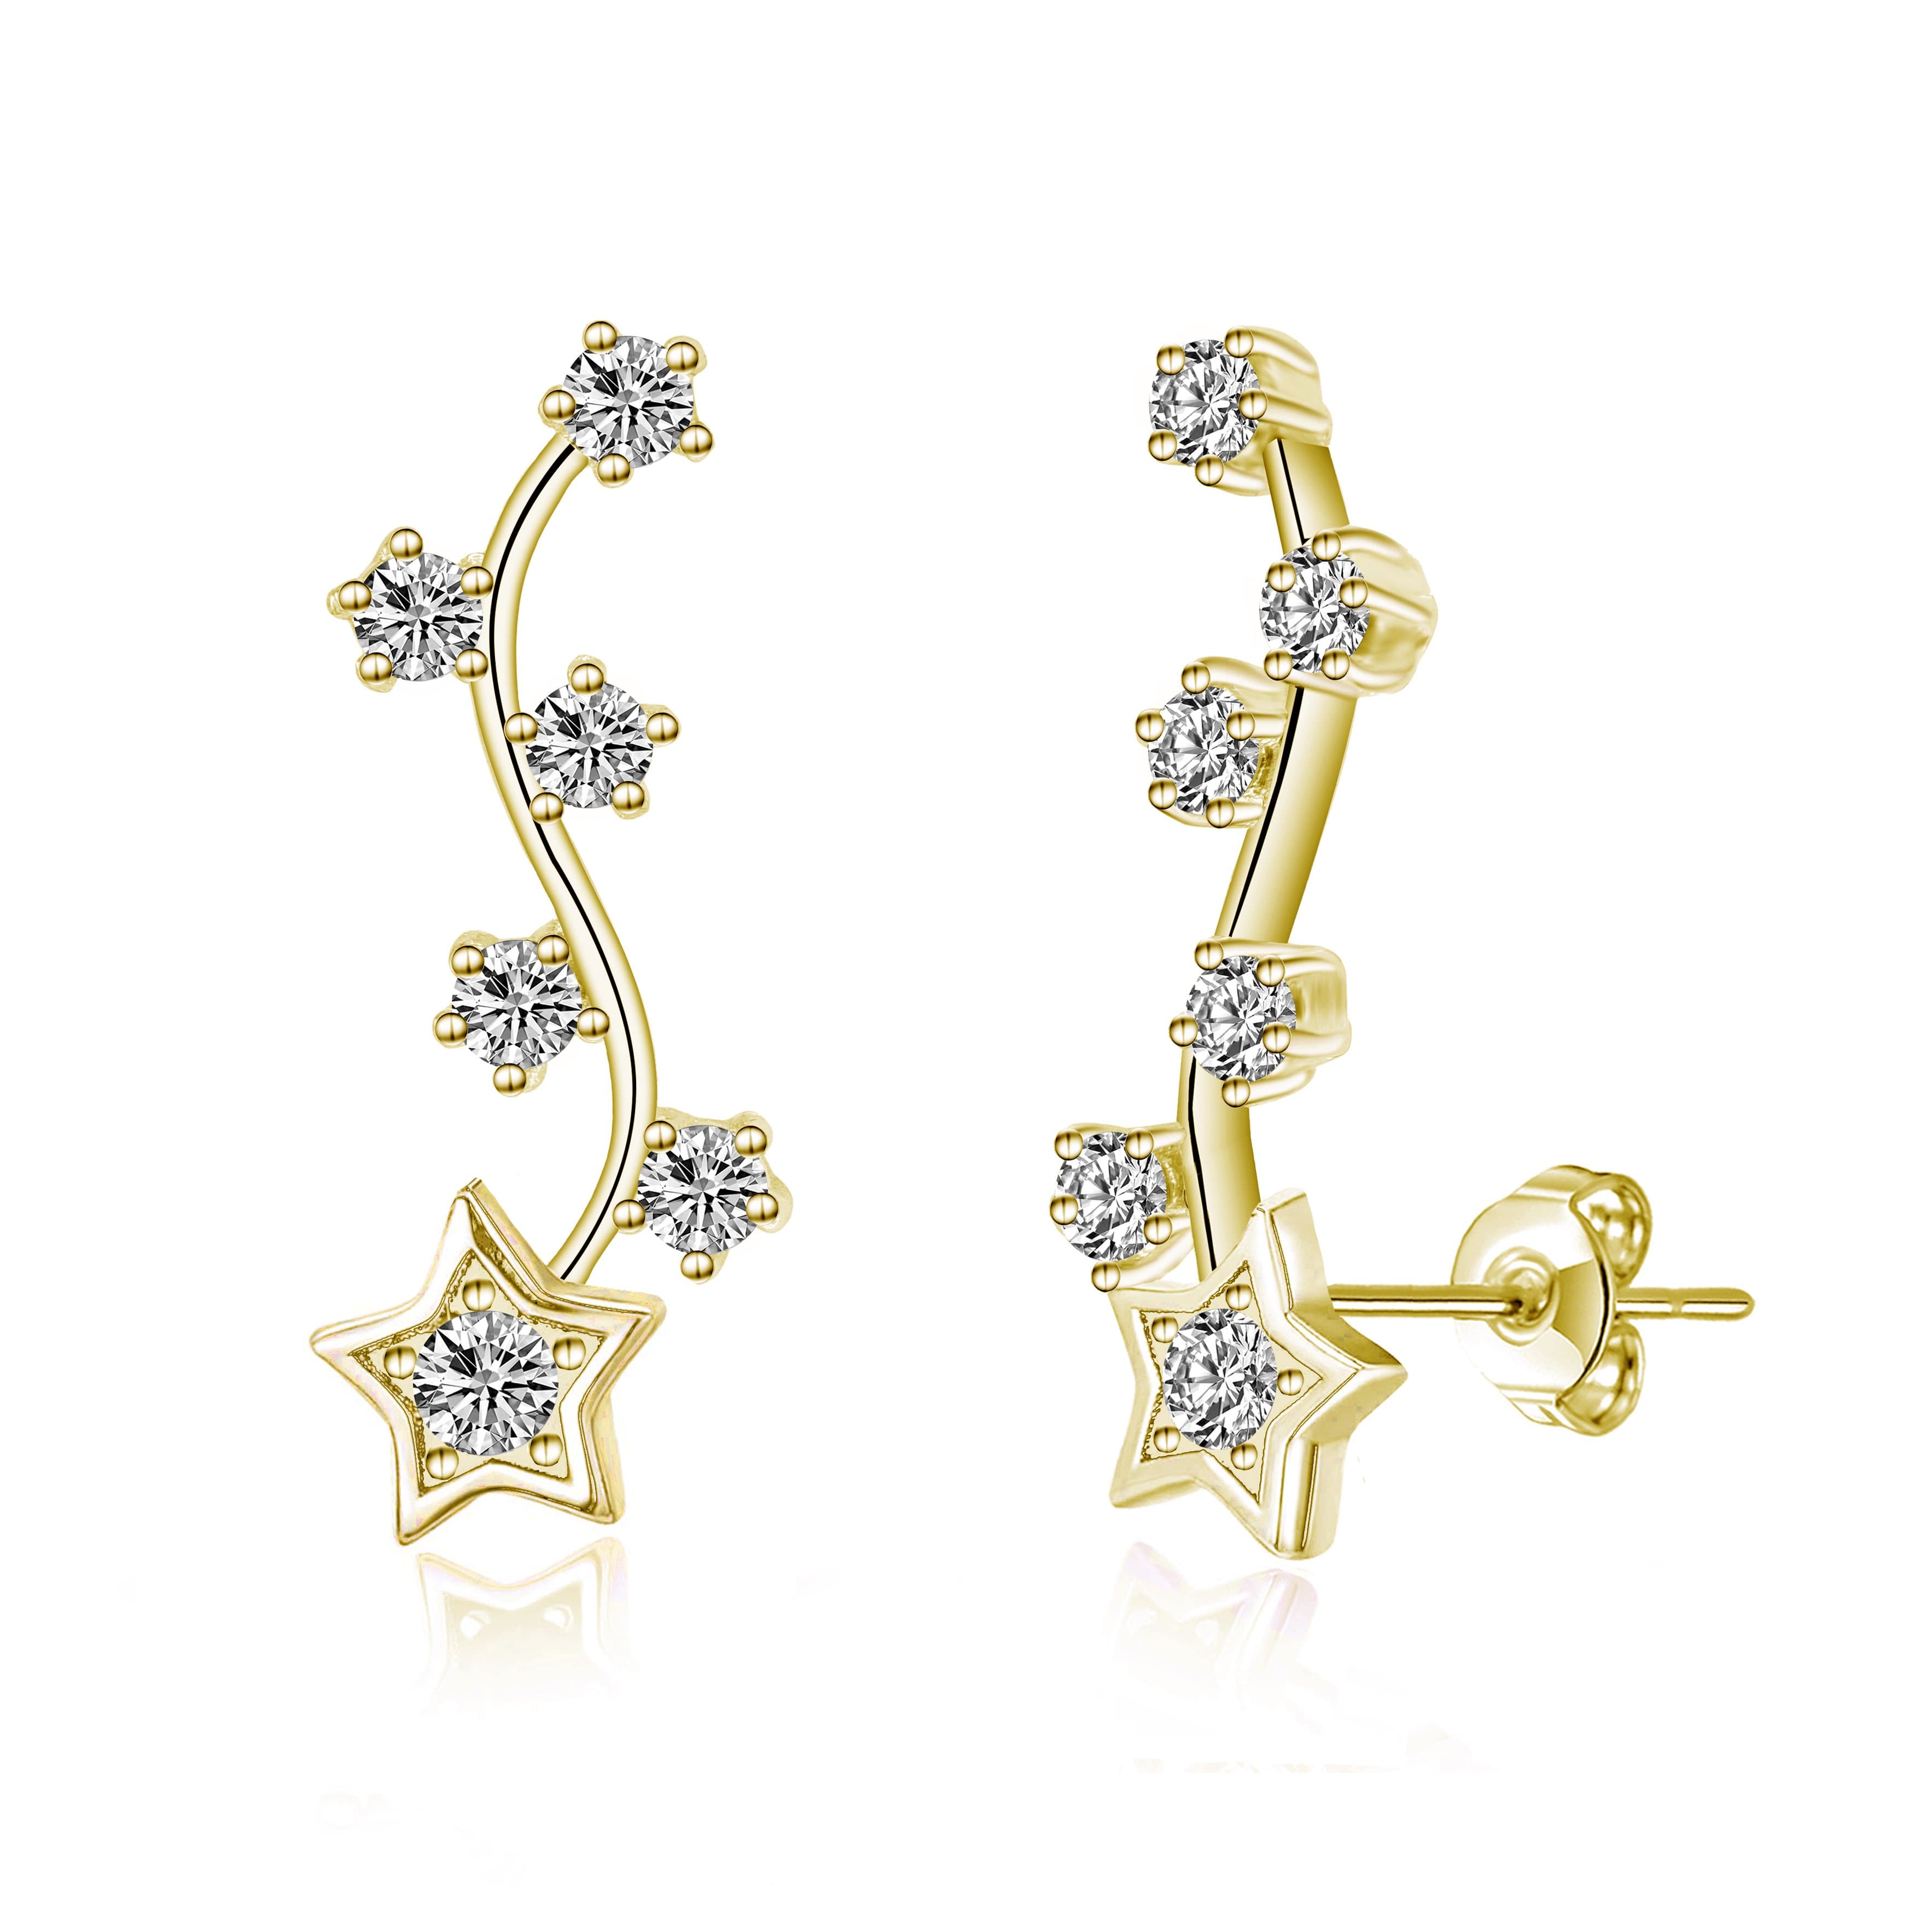 Gold Plated Star Climber Earrings Created with Zircondia® Crystals by Philip Jones Jewellery